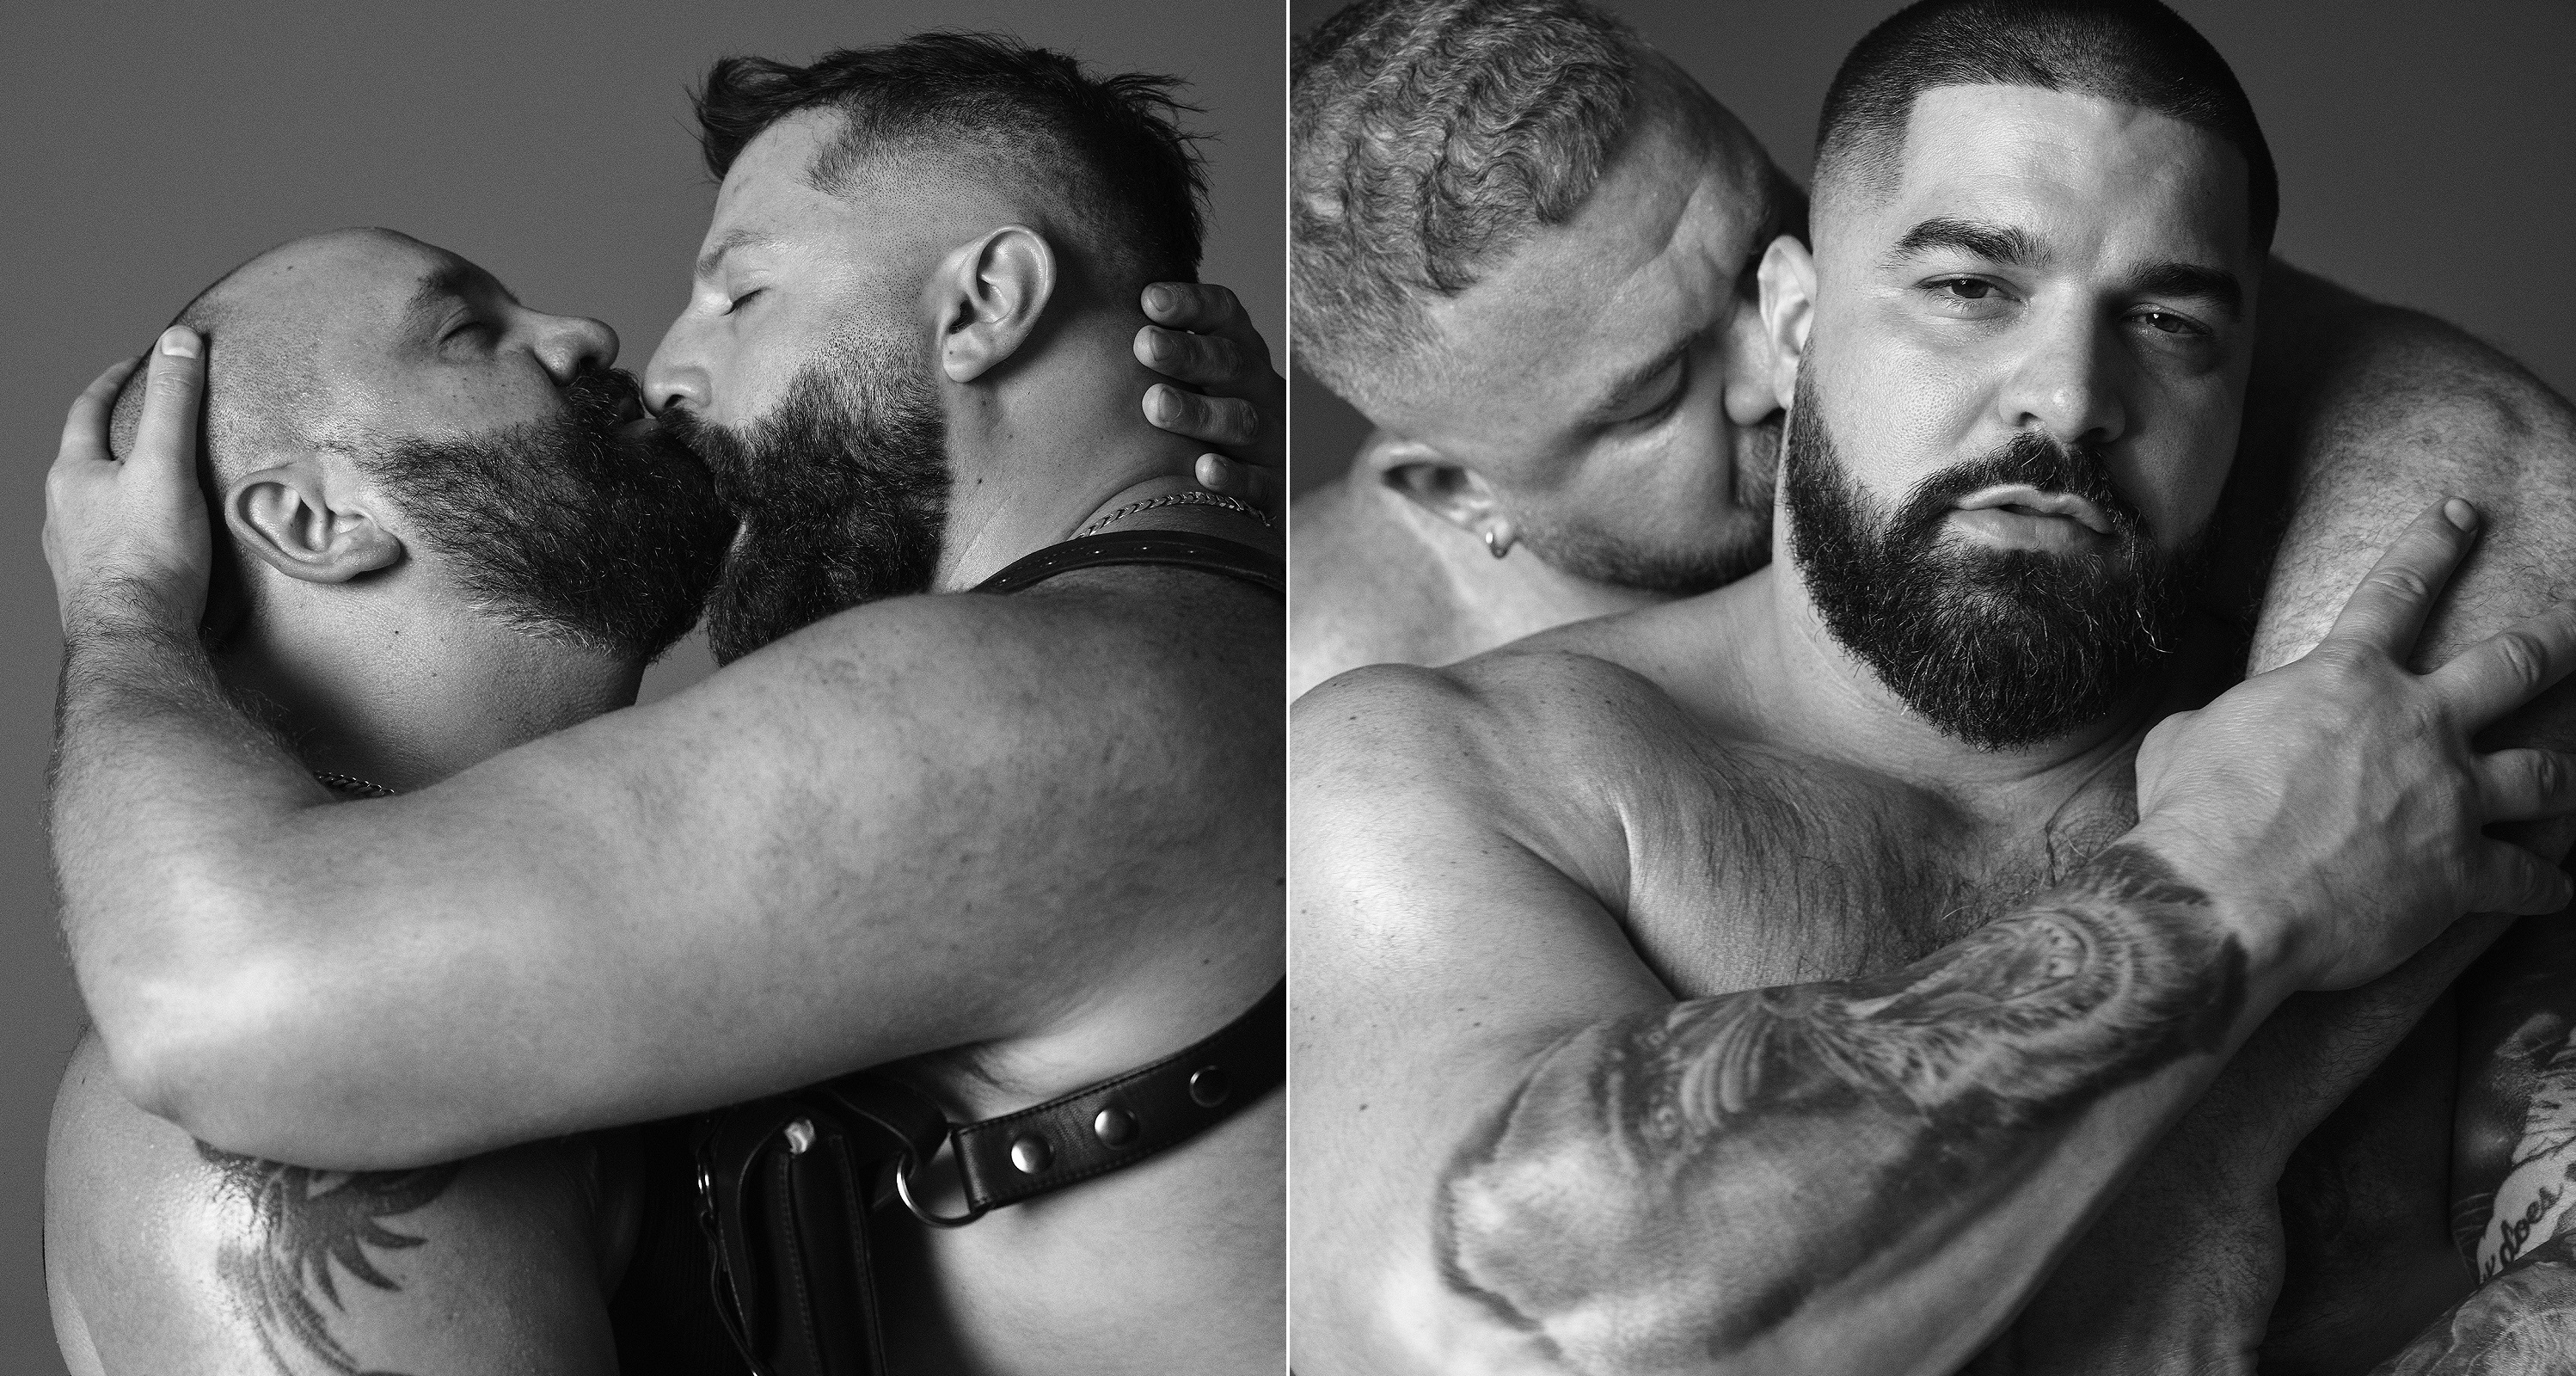 You can be a bigger size and still be sexy - Gay bears on body positivity and finding their tribe pic